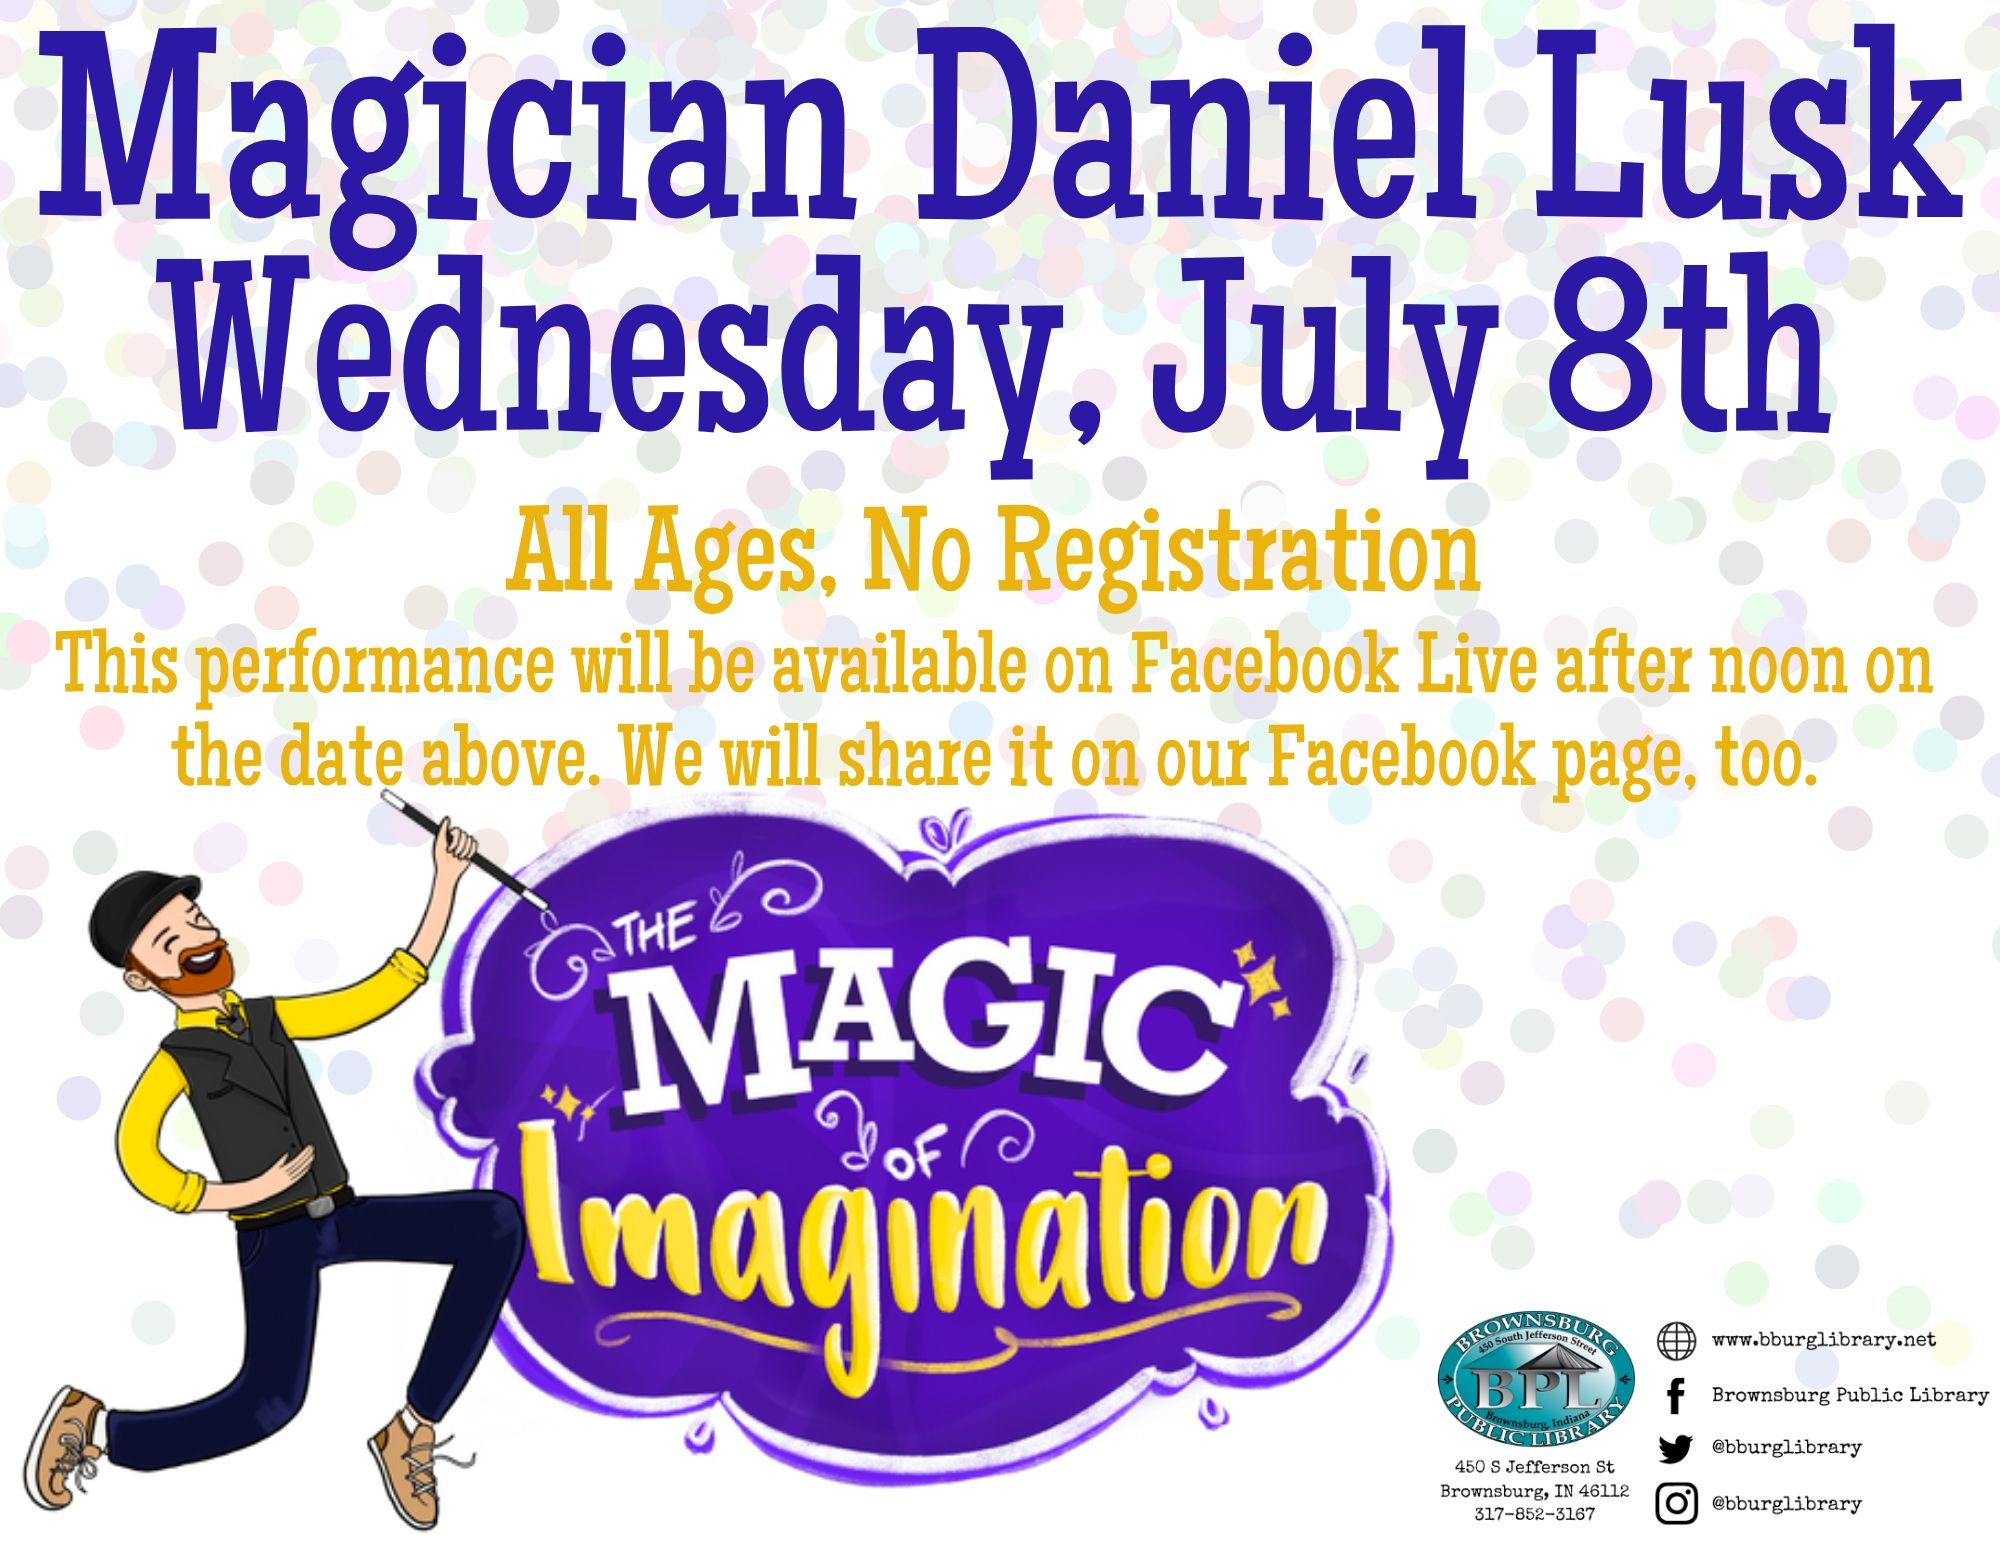 Flyer for Magician Daniel Lusk featuring an illustrated Daniel jumping with a wand next to a purple cloud with the word "Magic of the Imagination" over the cloud. 